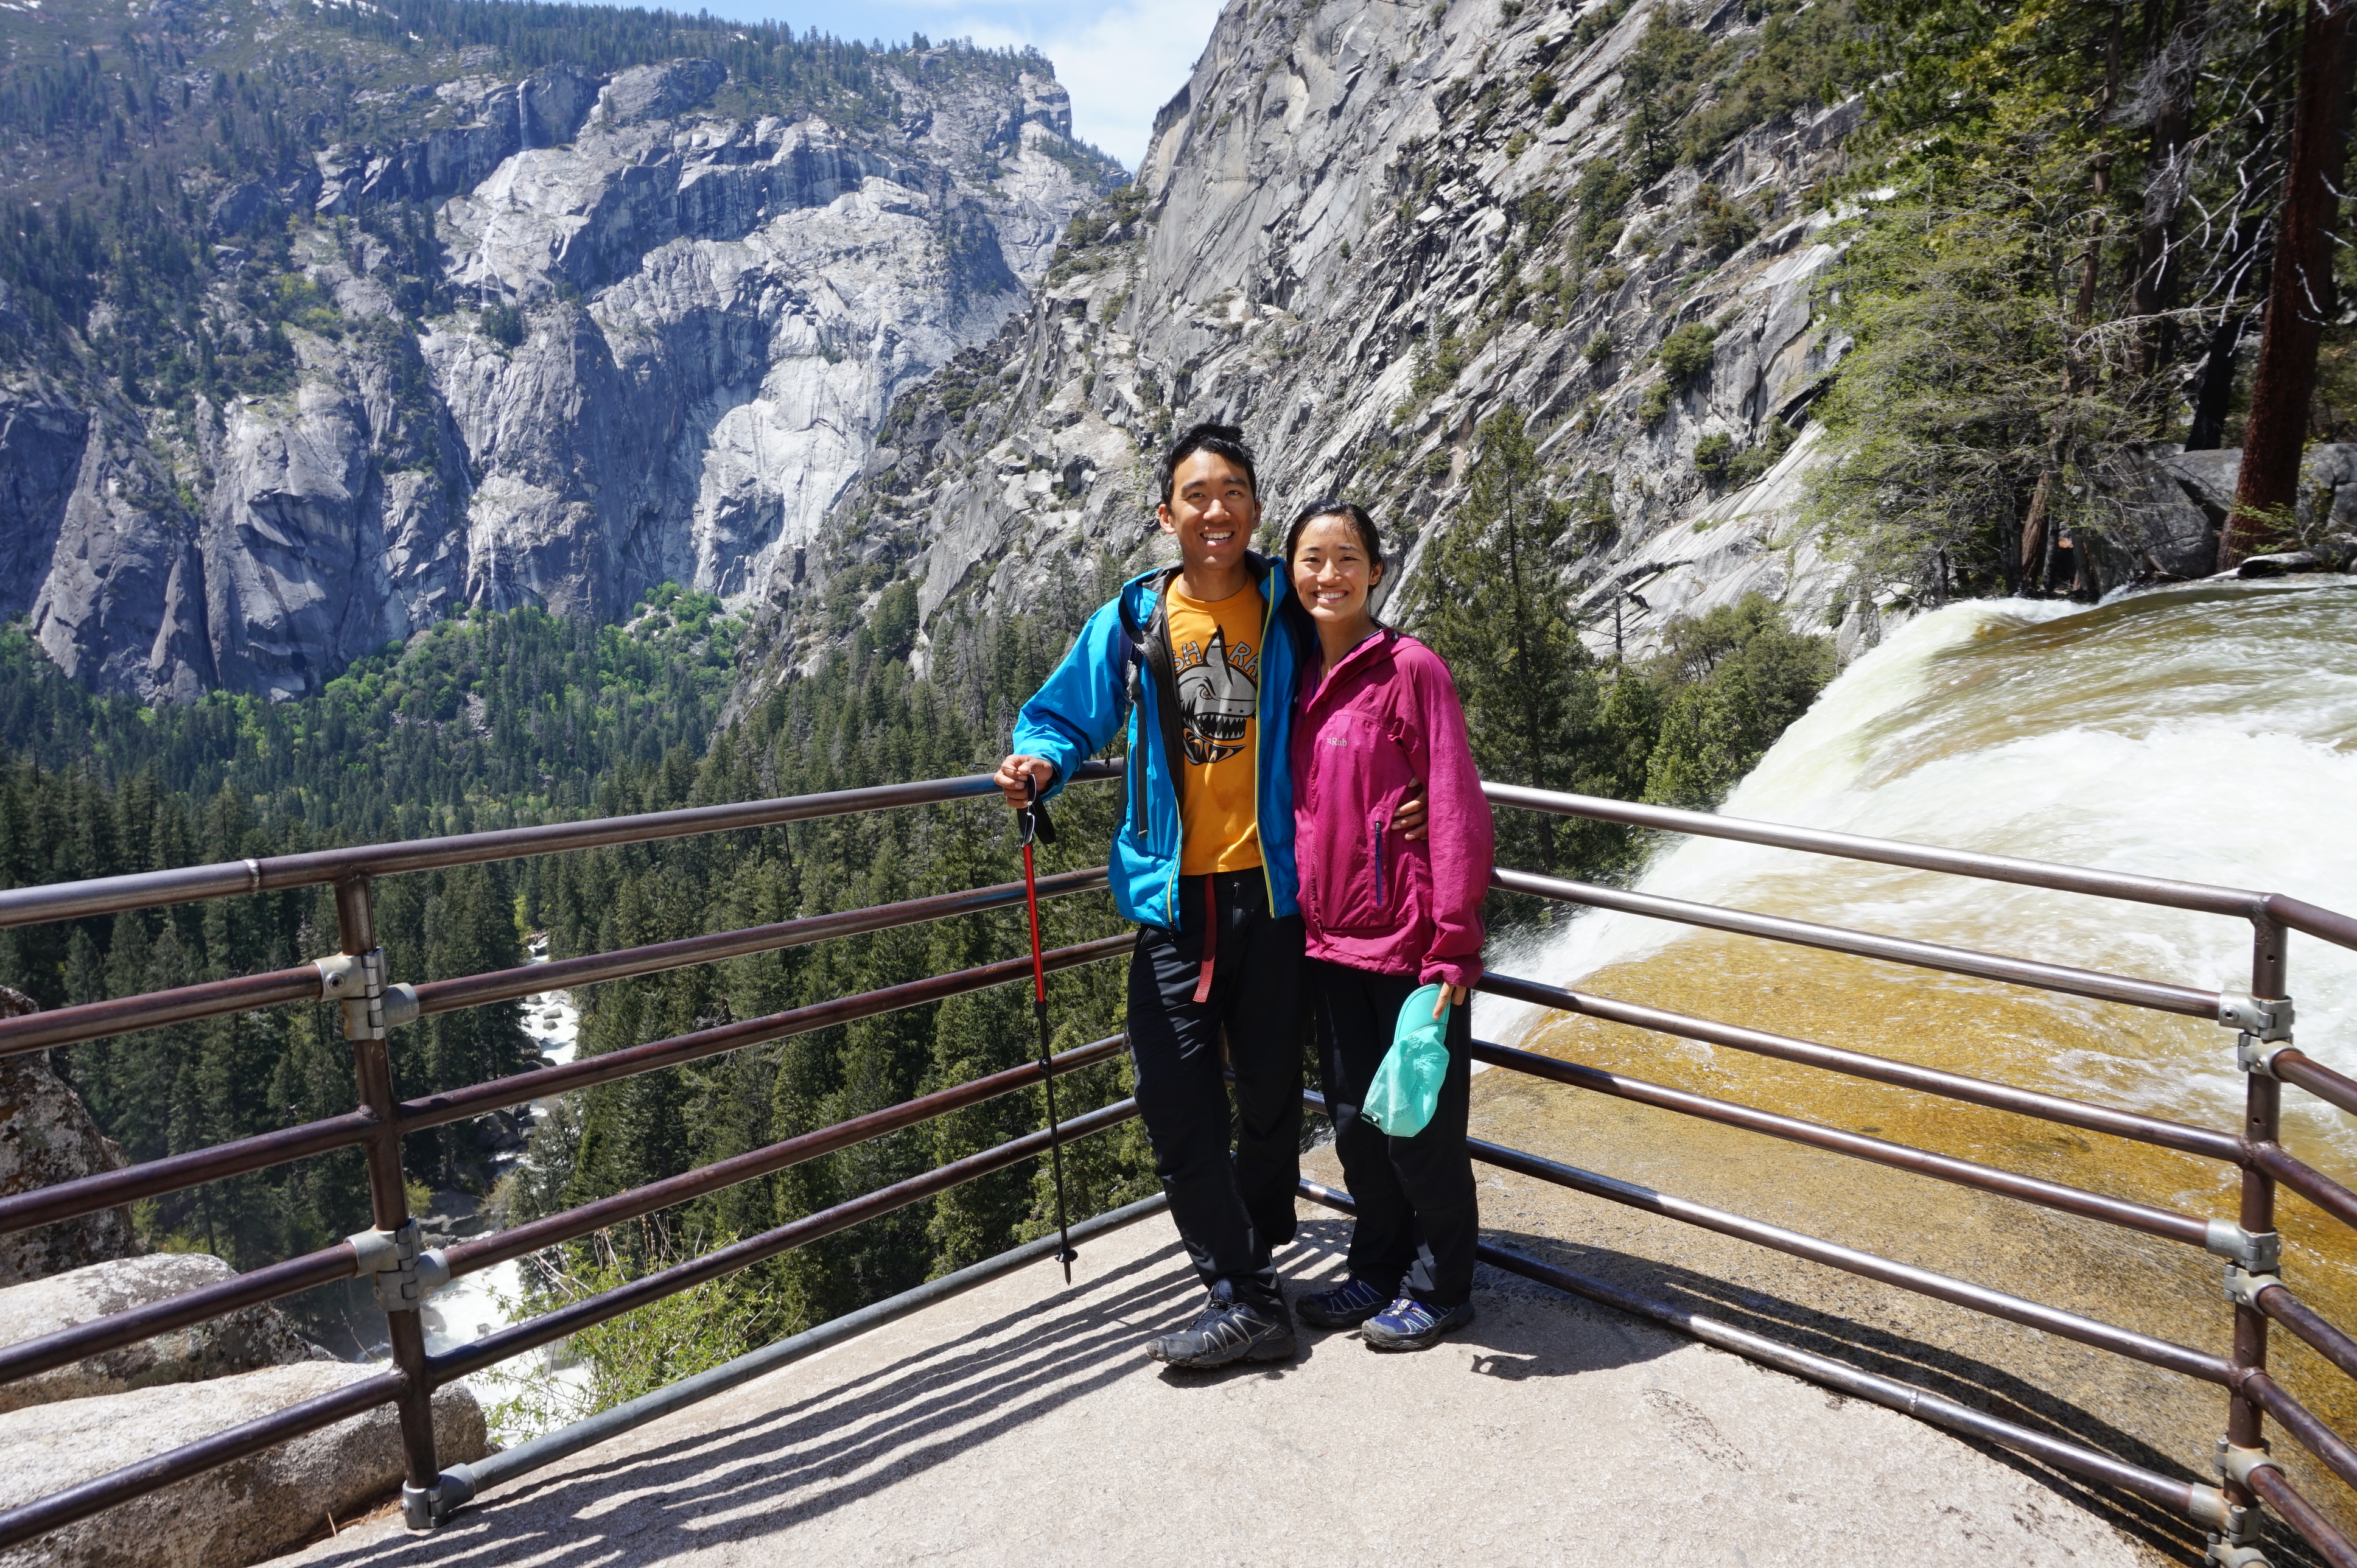 There are two more waterfalls behind Happy Isles and Half Dome. This is us at the top of Vernal Fall. We hiked the very, very wet and aptly named Mist Trail to get to this point.